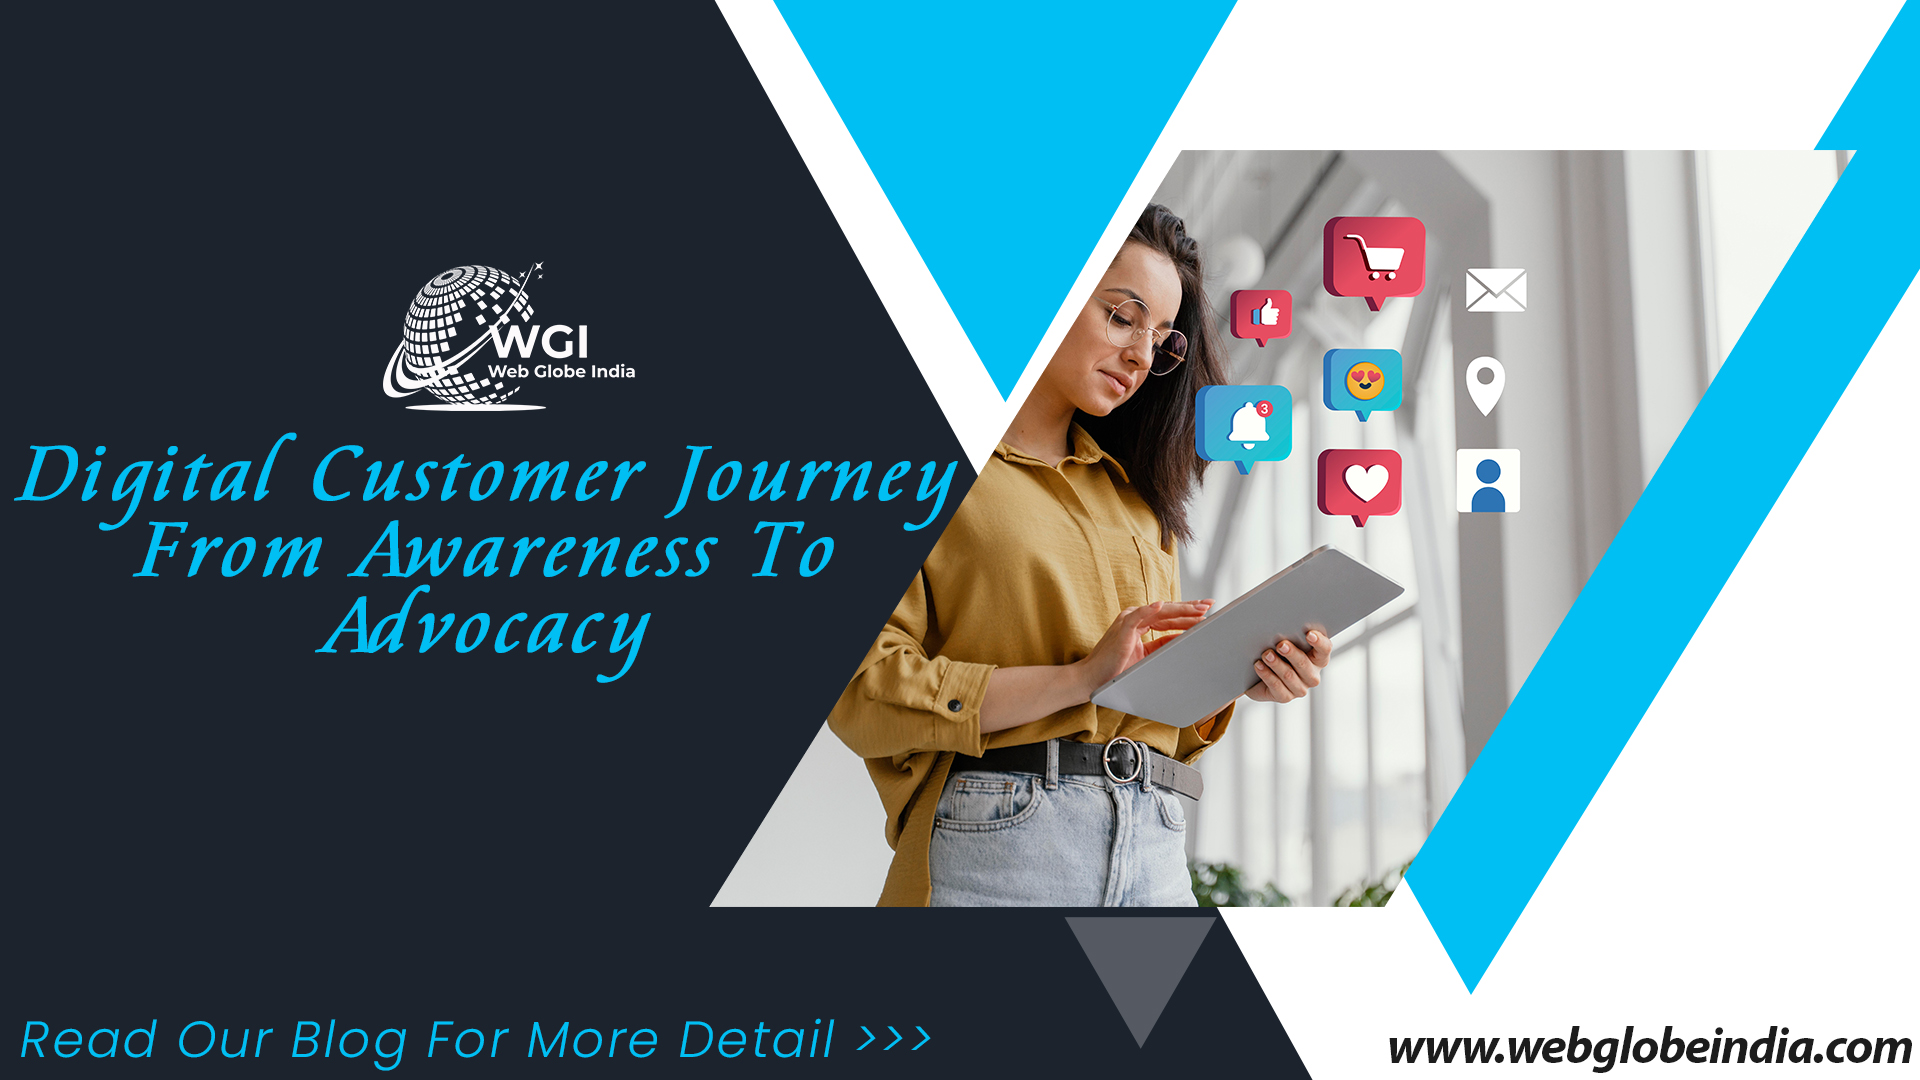 Digital Customer Journey From Awareness To Advocacy